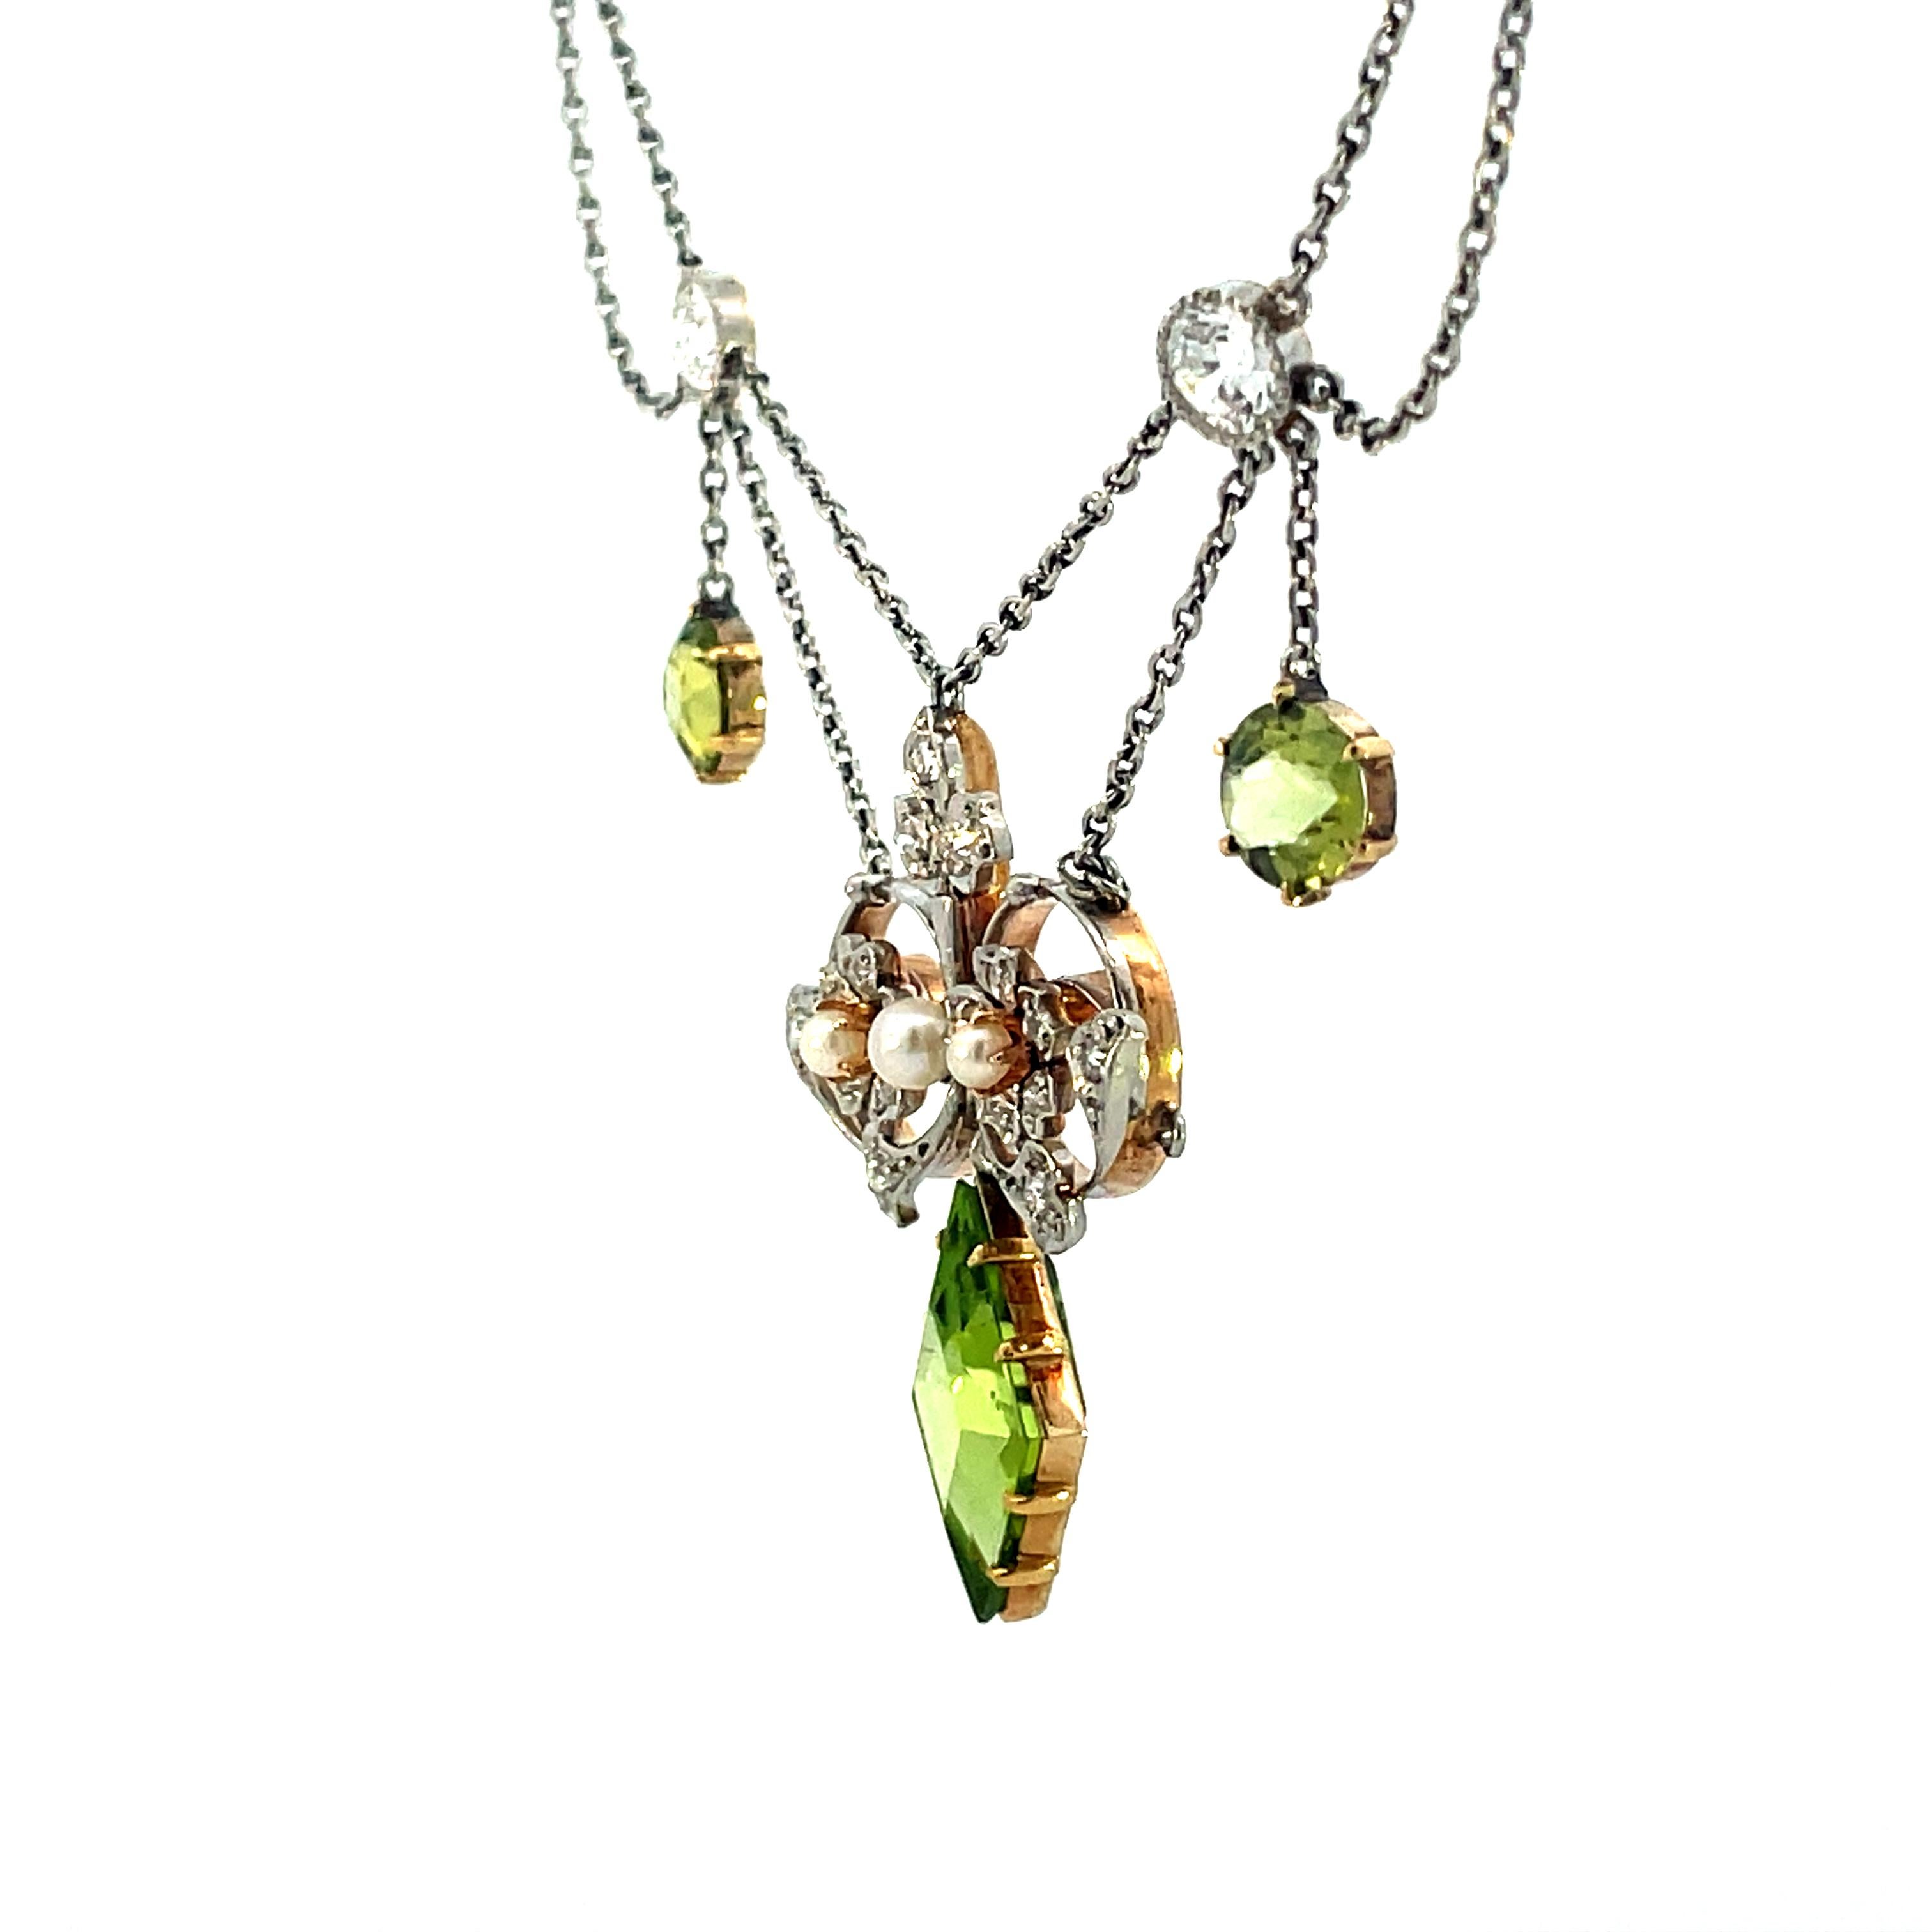 1910 Edwardian Platinum over 14K Rose Gold Peridot, Diamond and Pearl Necklace  In Excellent Condition For Sale In Lexington, KY